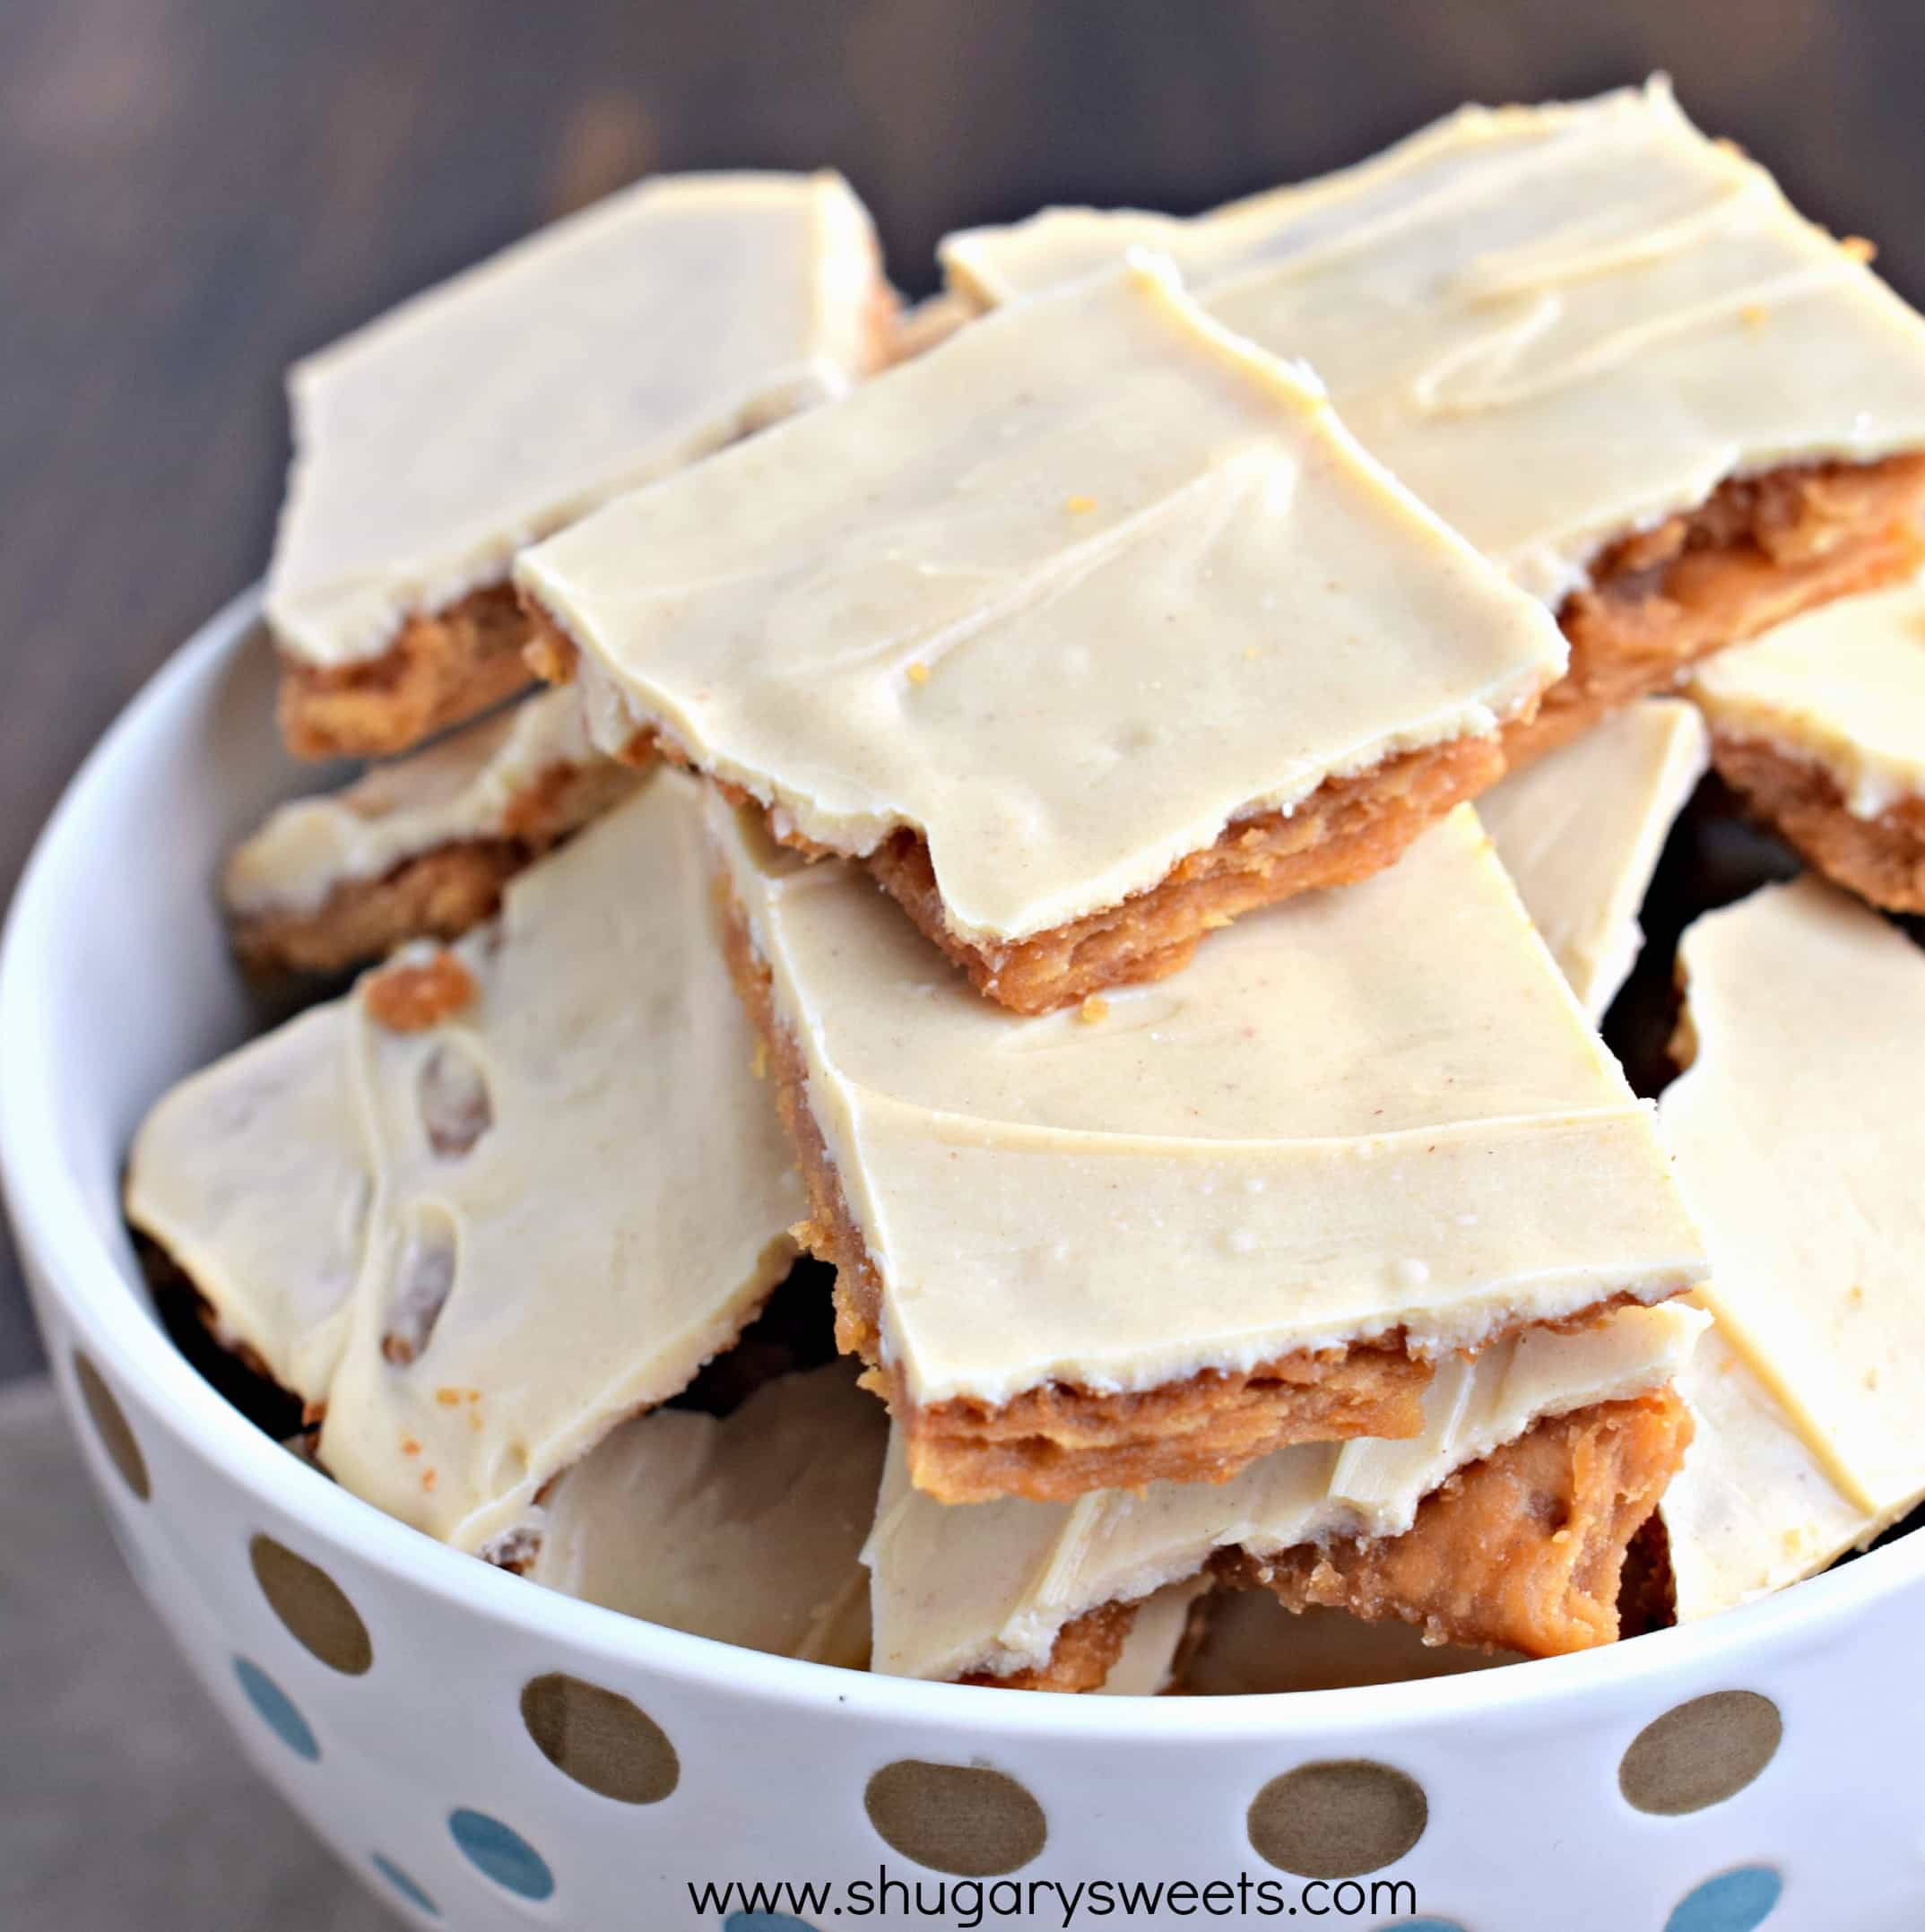 Bowl with peanut butter cracker toffee.